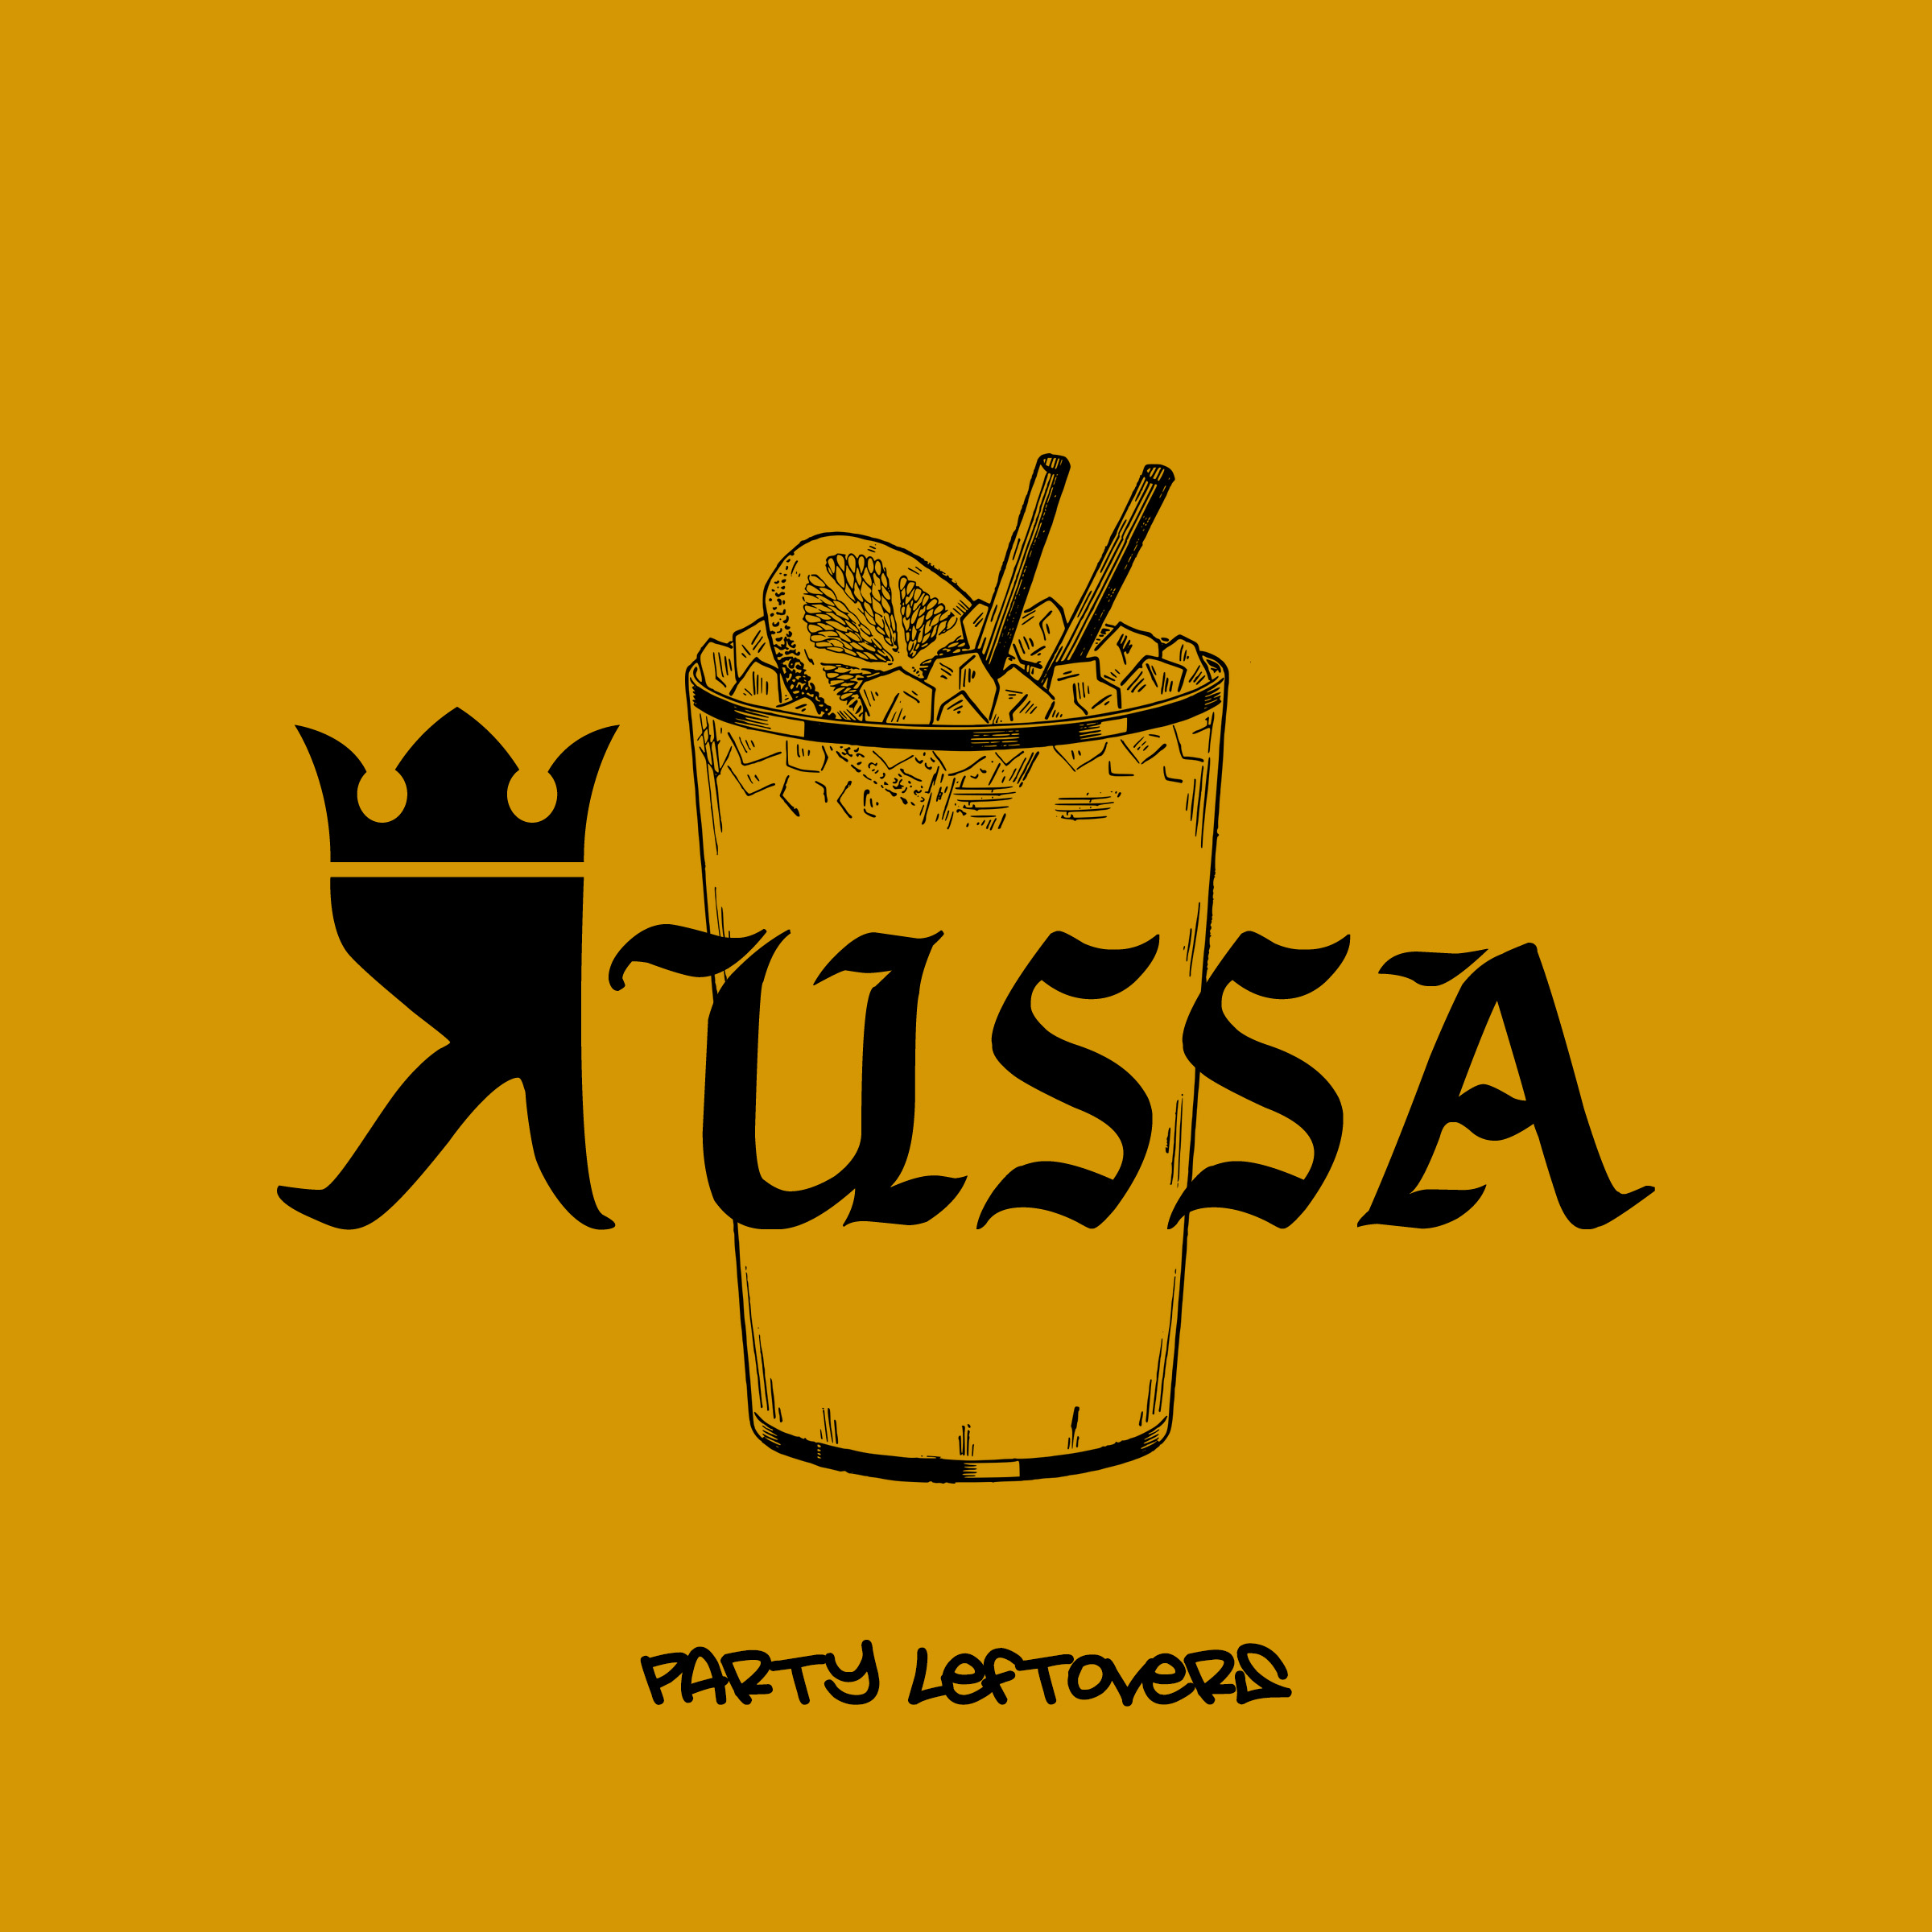 35. Russa - ep Party Leftovers